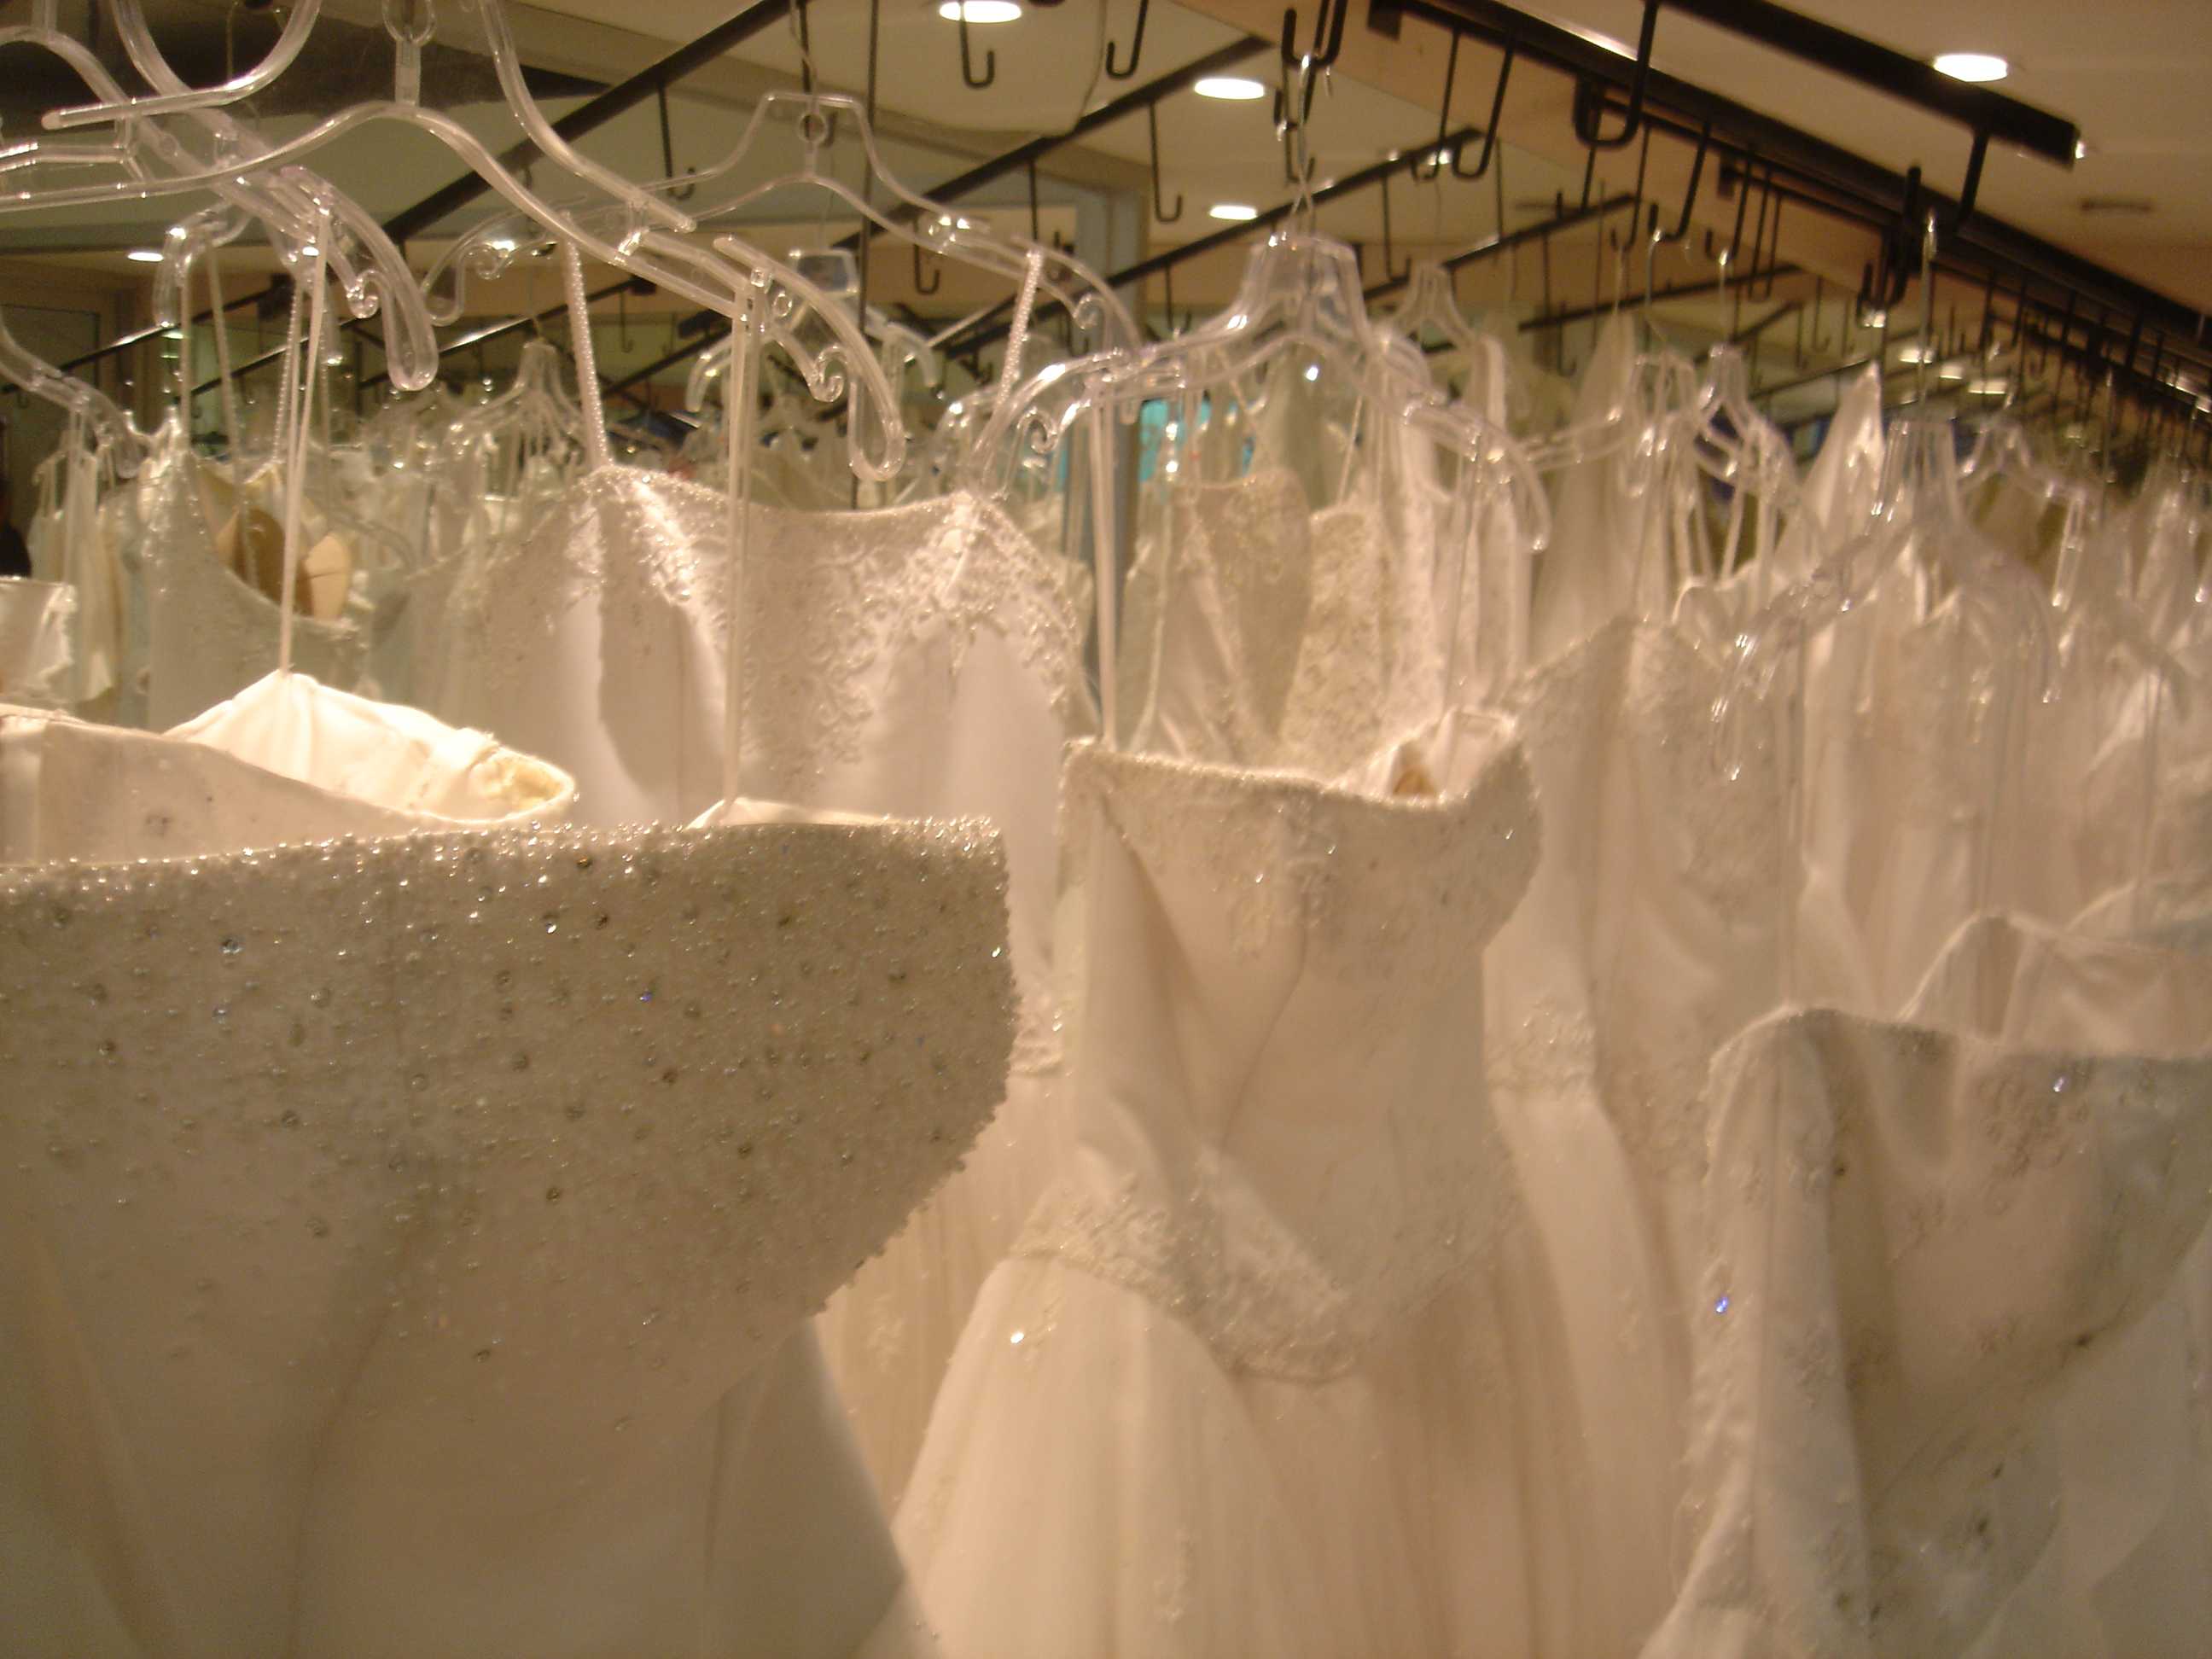 Wedding dresses offered to first responders, spouses in exchange for one thing